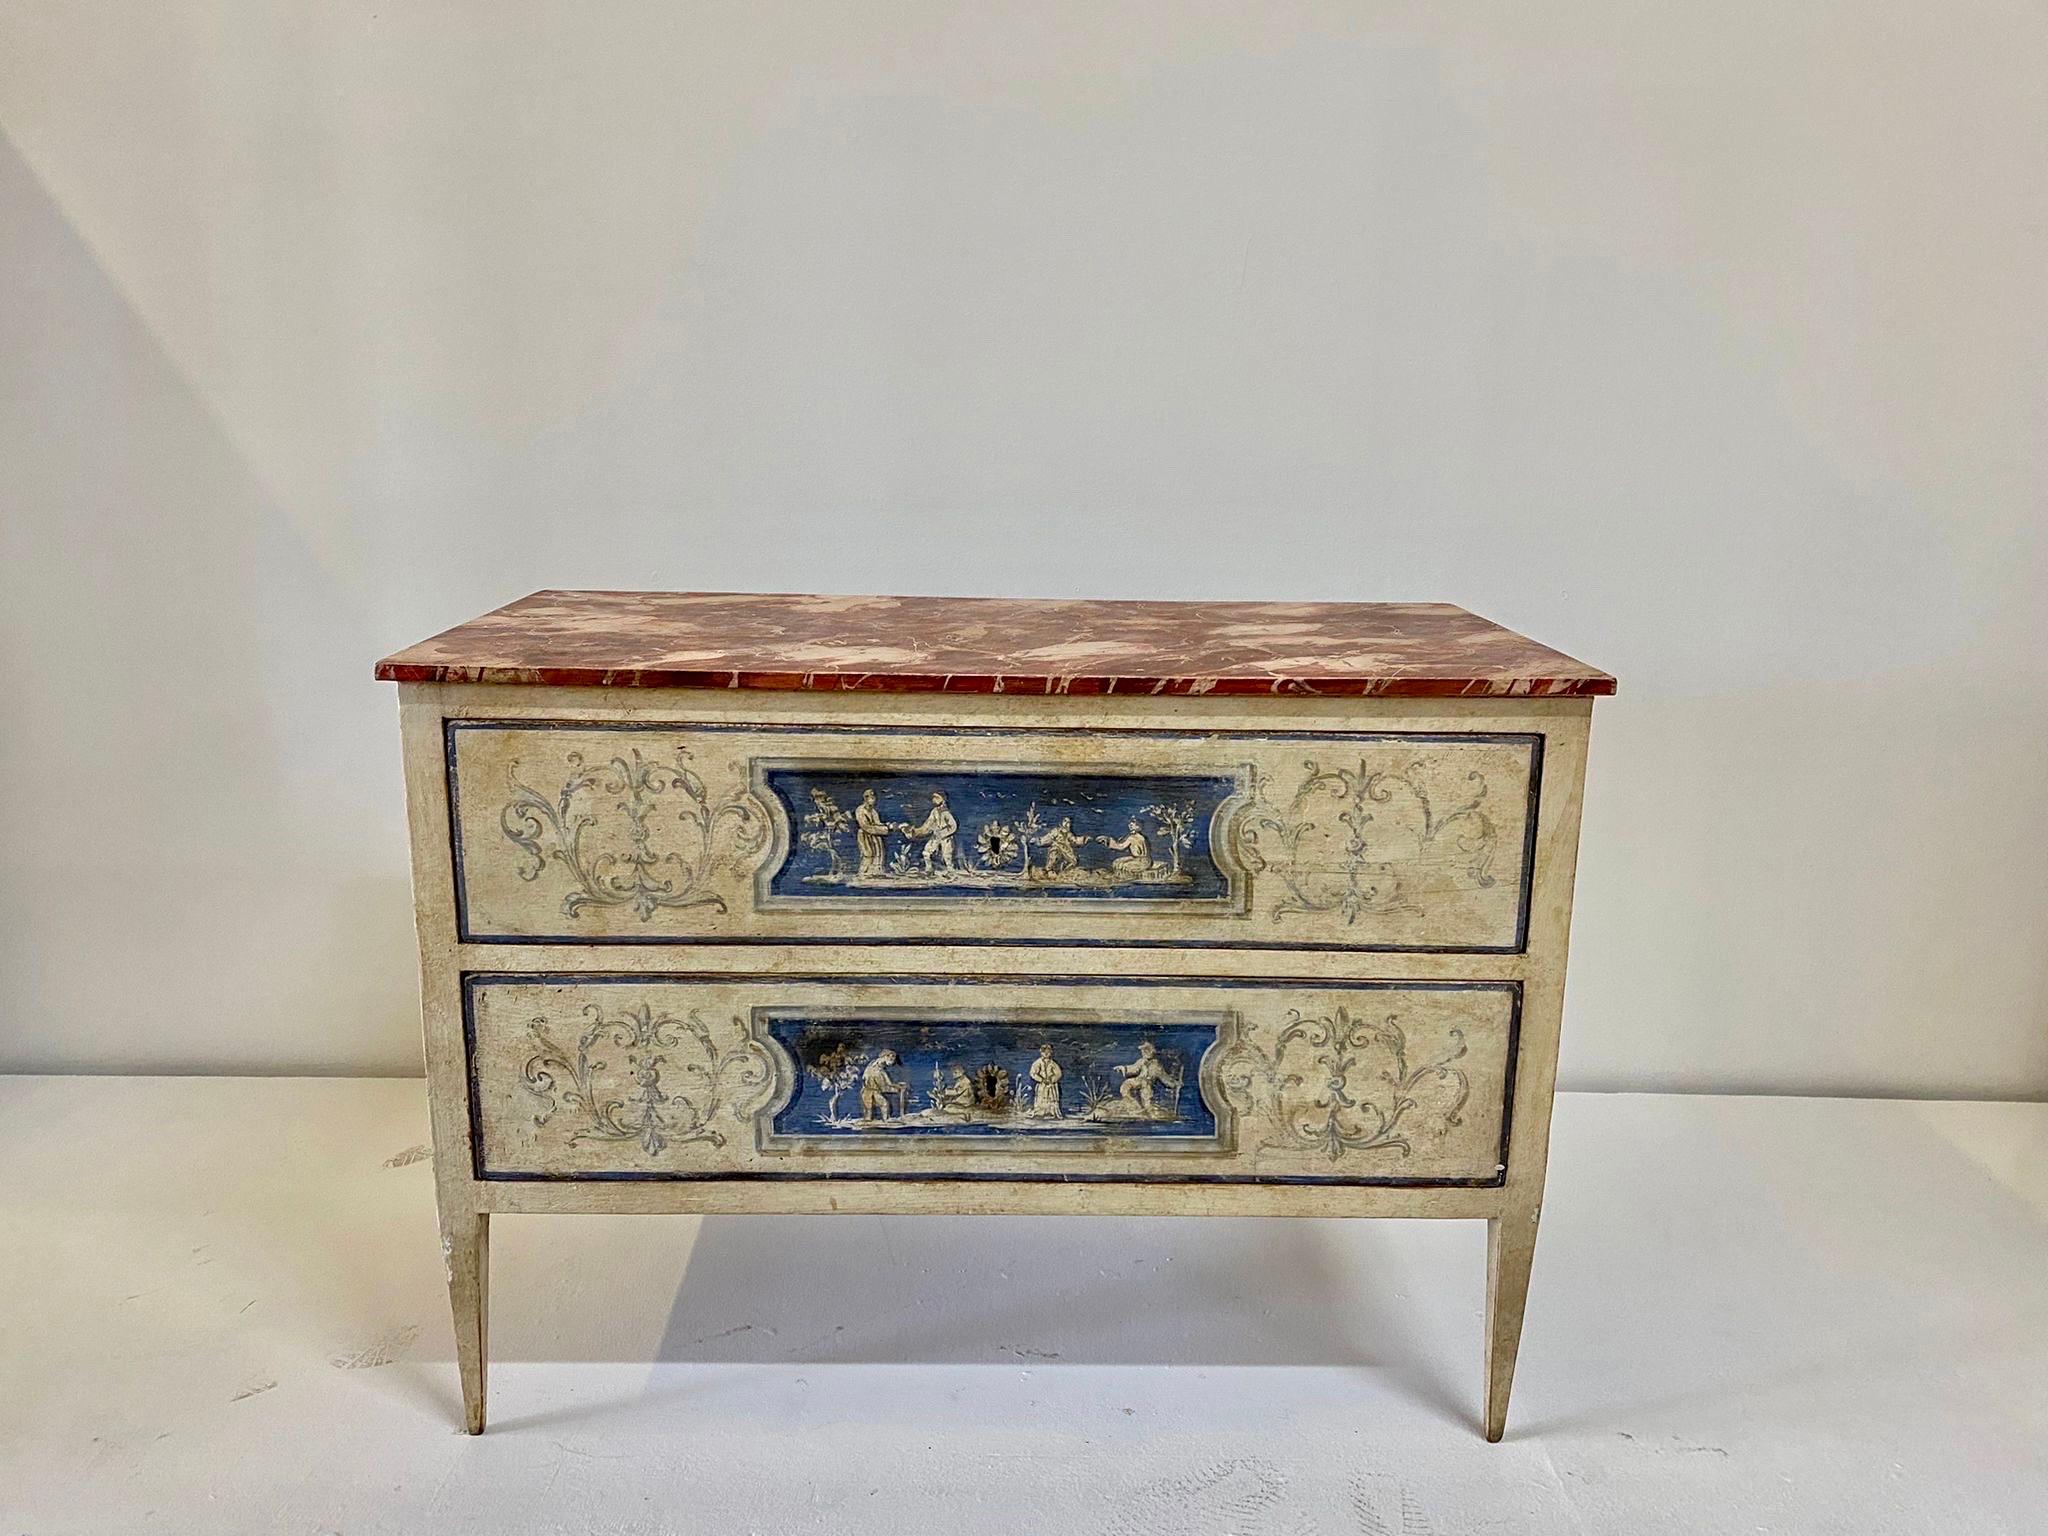 Very fine 19th century Venetian two-drawer commode with keys, the top is faux painted to simulate Sienna marble, over the neoclassical designed commode. Standing on square tapered legs, hand-painted sides and front.